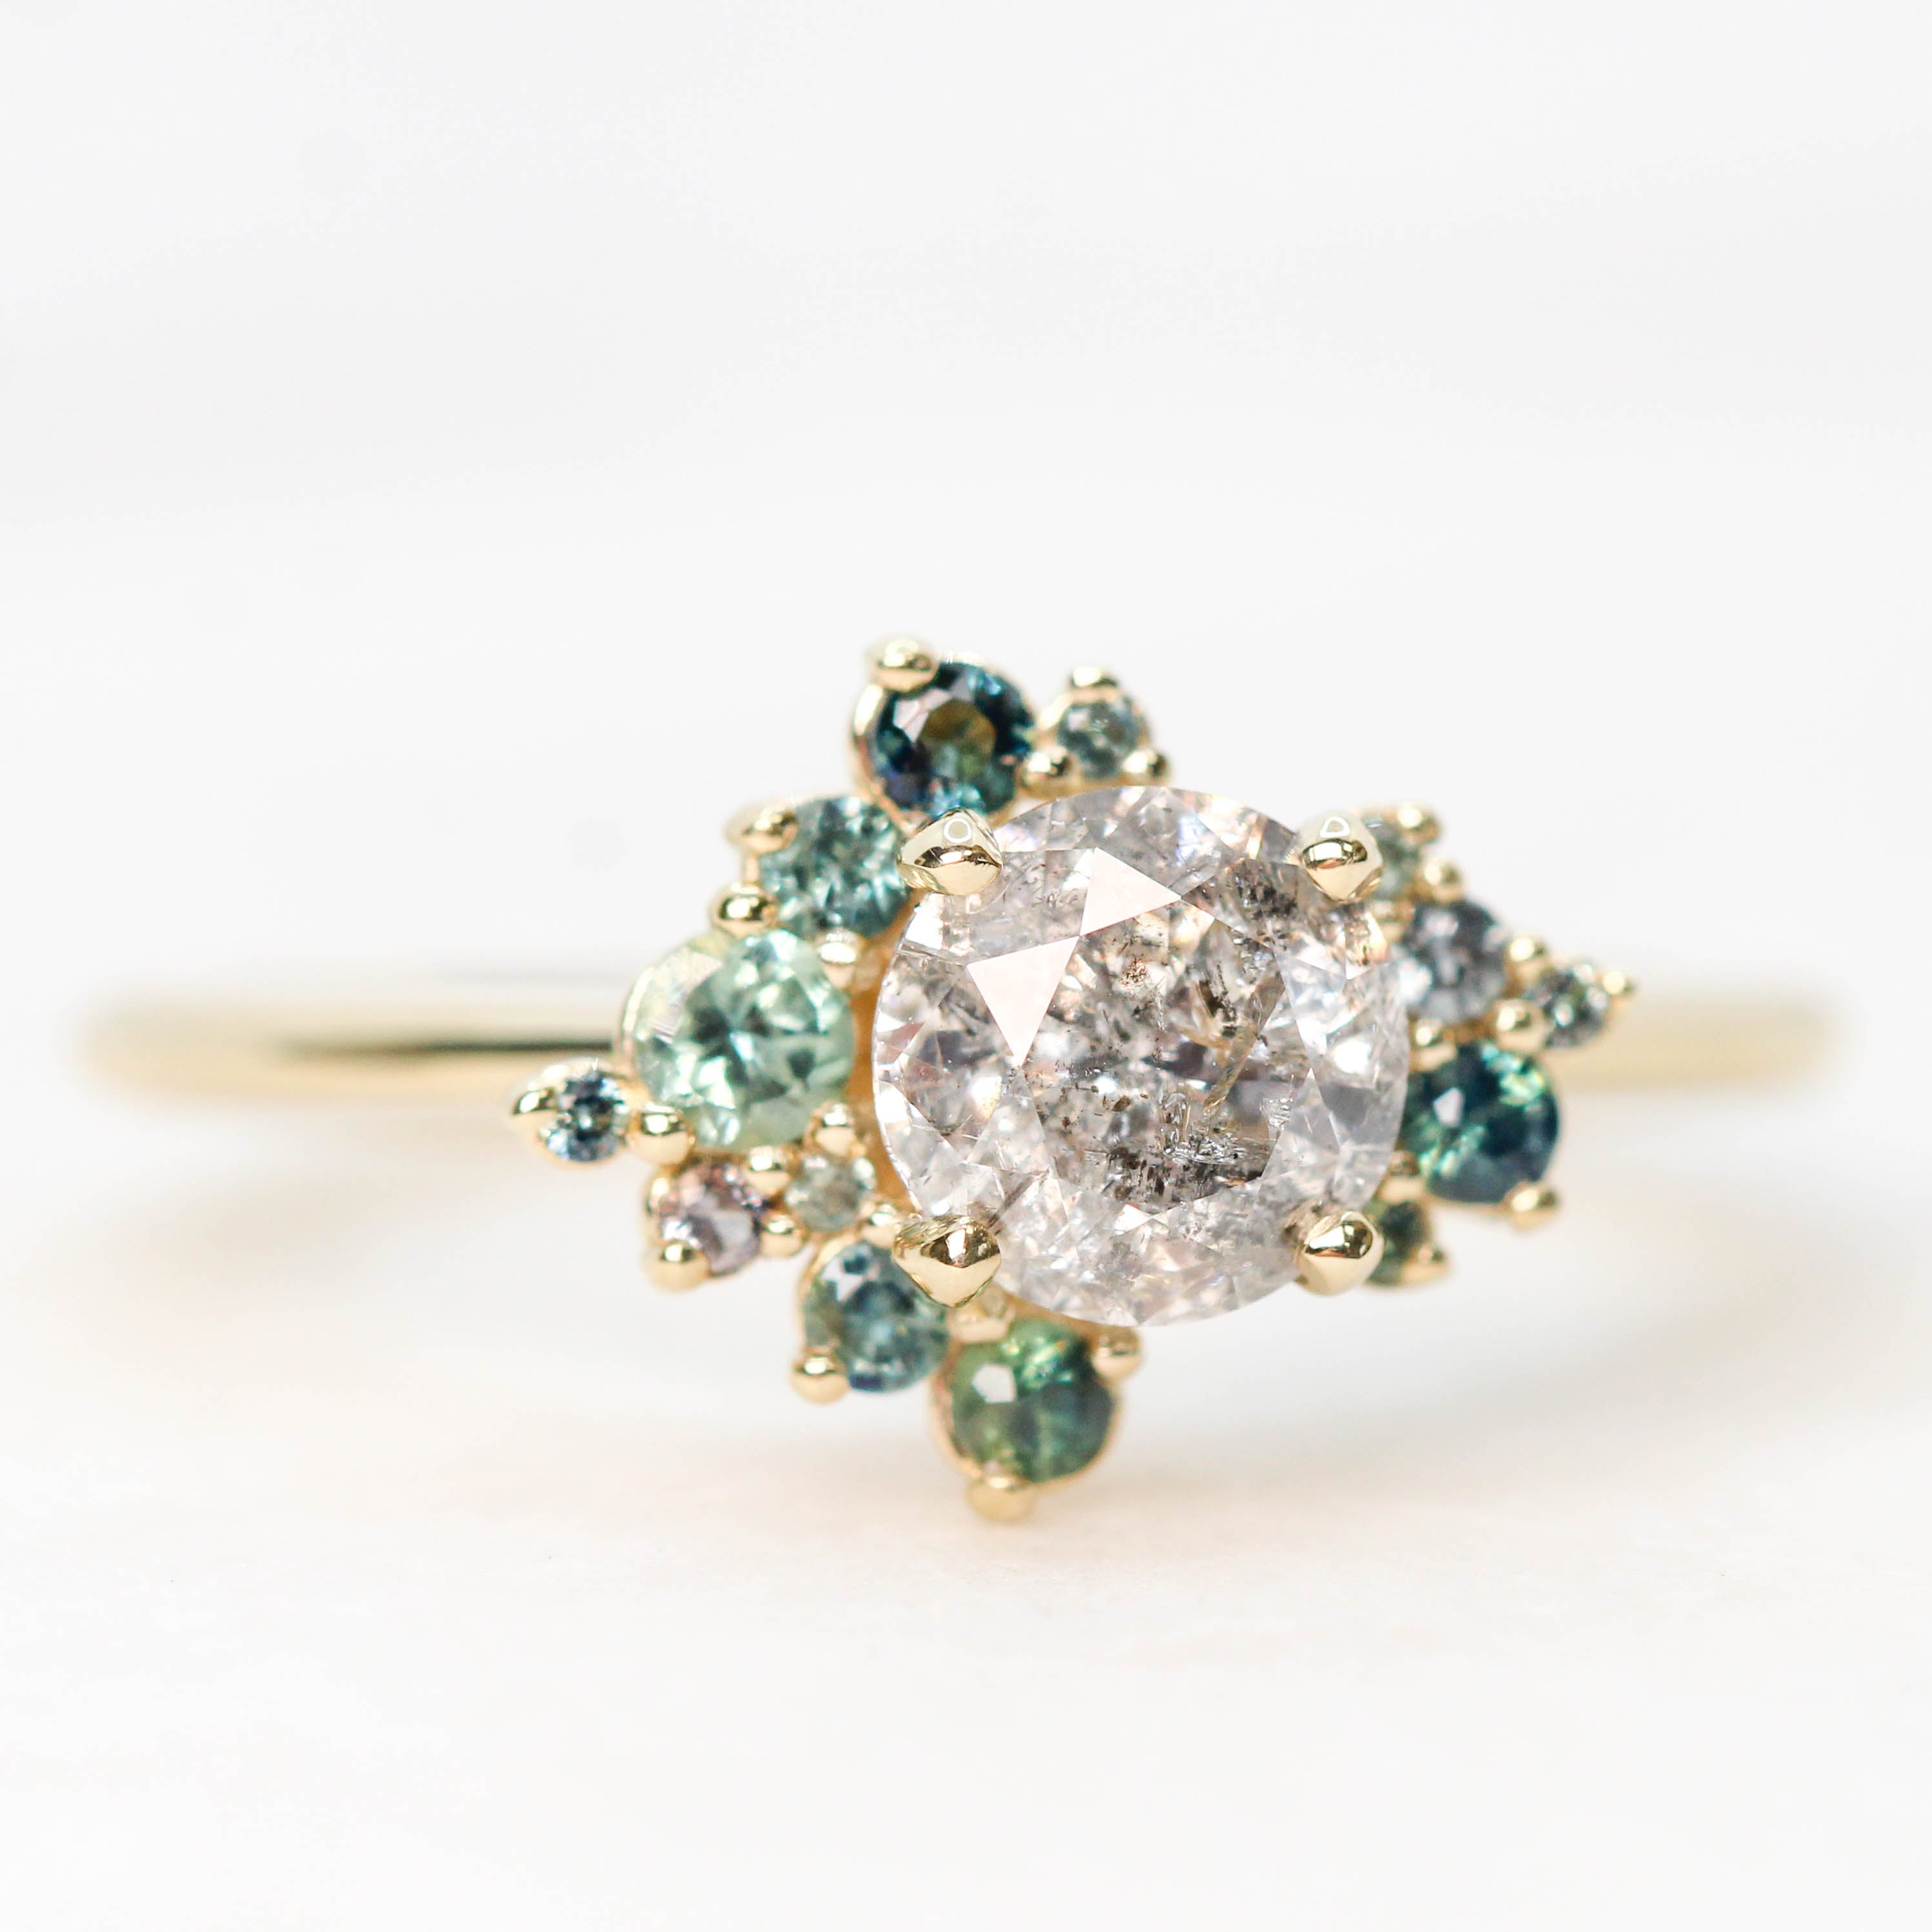 Orion Ring with a 1.00 Carat Gray Round Diamond and Teal Accent Sapphires  in 14k Yellow Gold - Ready to Size and Ship - Midwinter Co. Alternative Bridal Rings and Modern Fine Jewelry